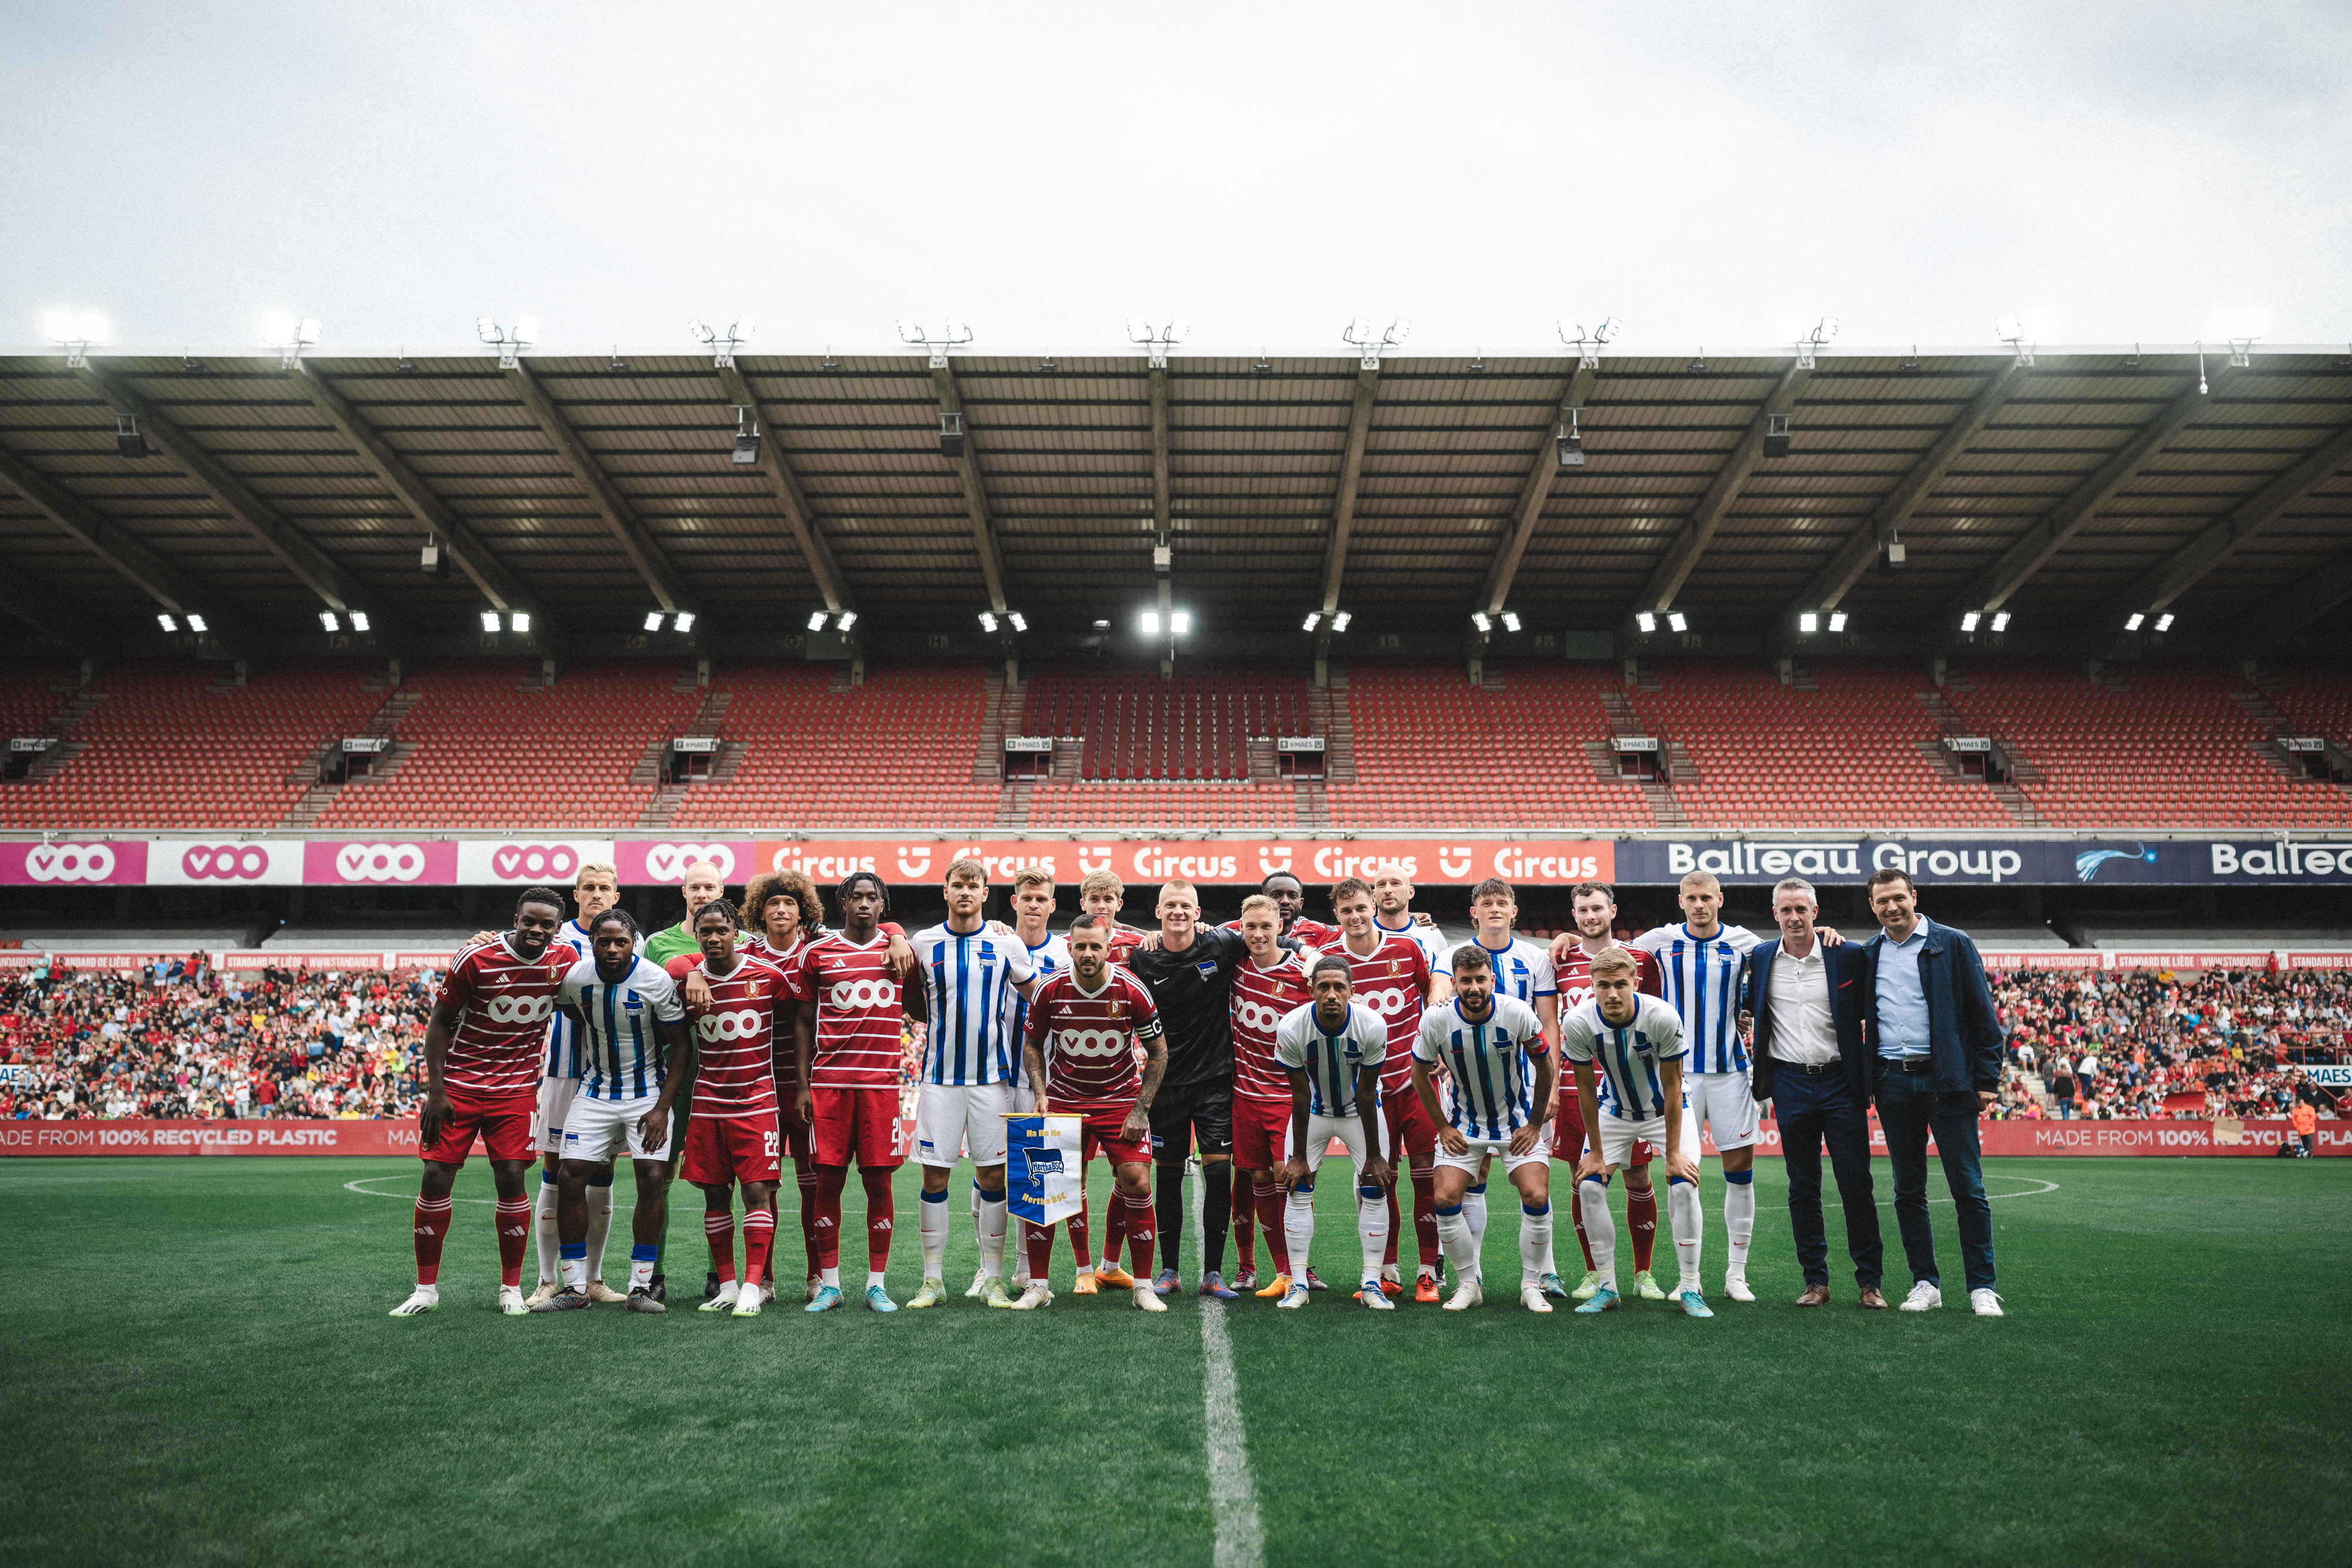 Standard and Hertha players pose for a picture together.